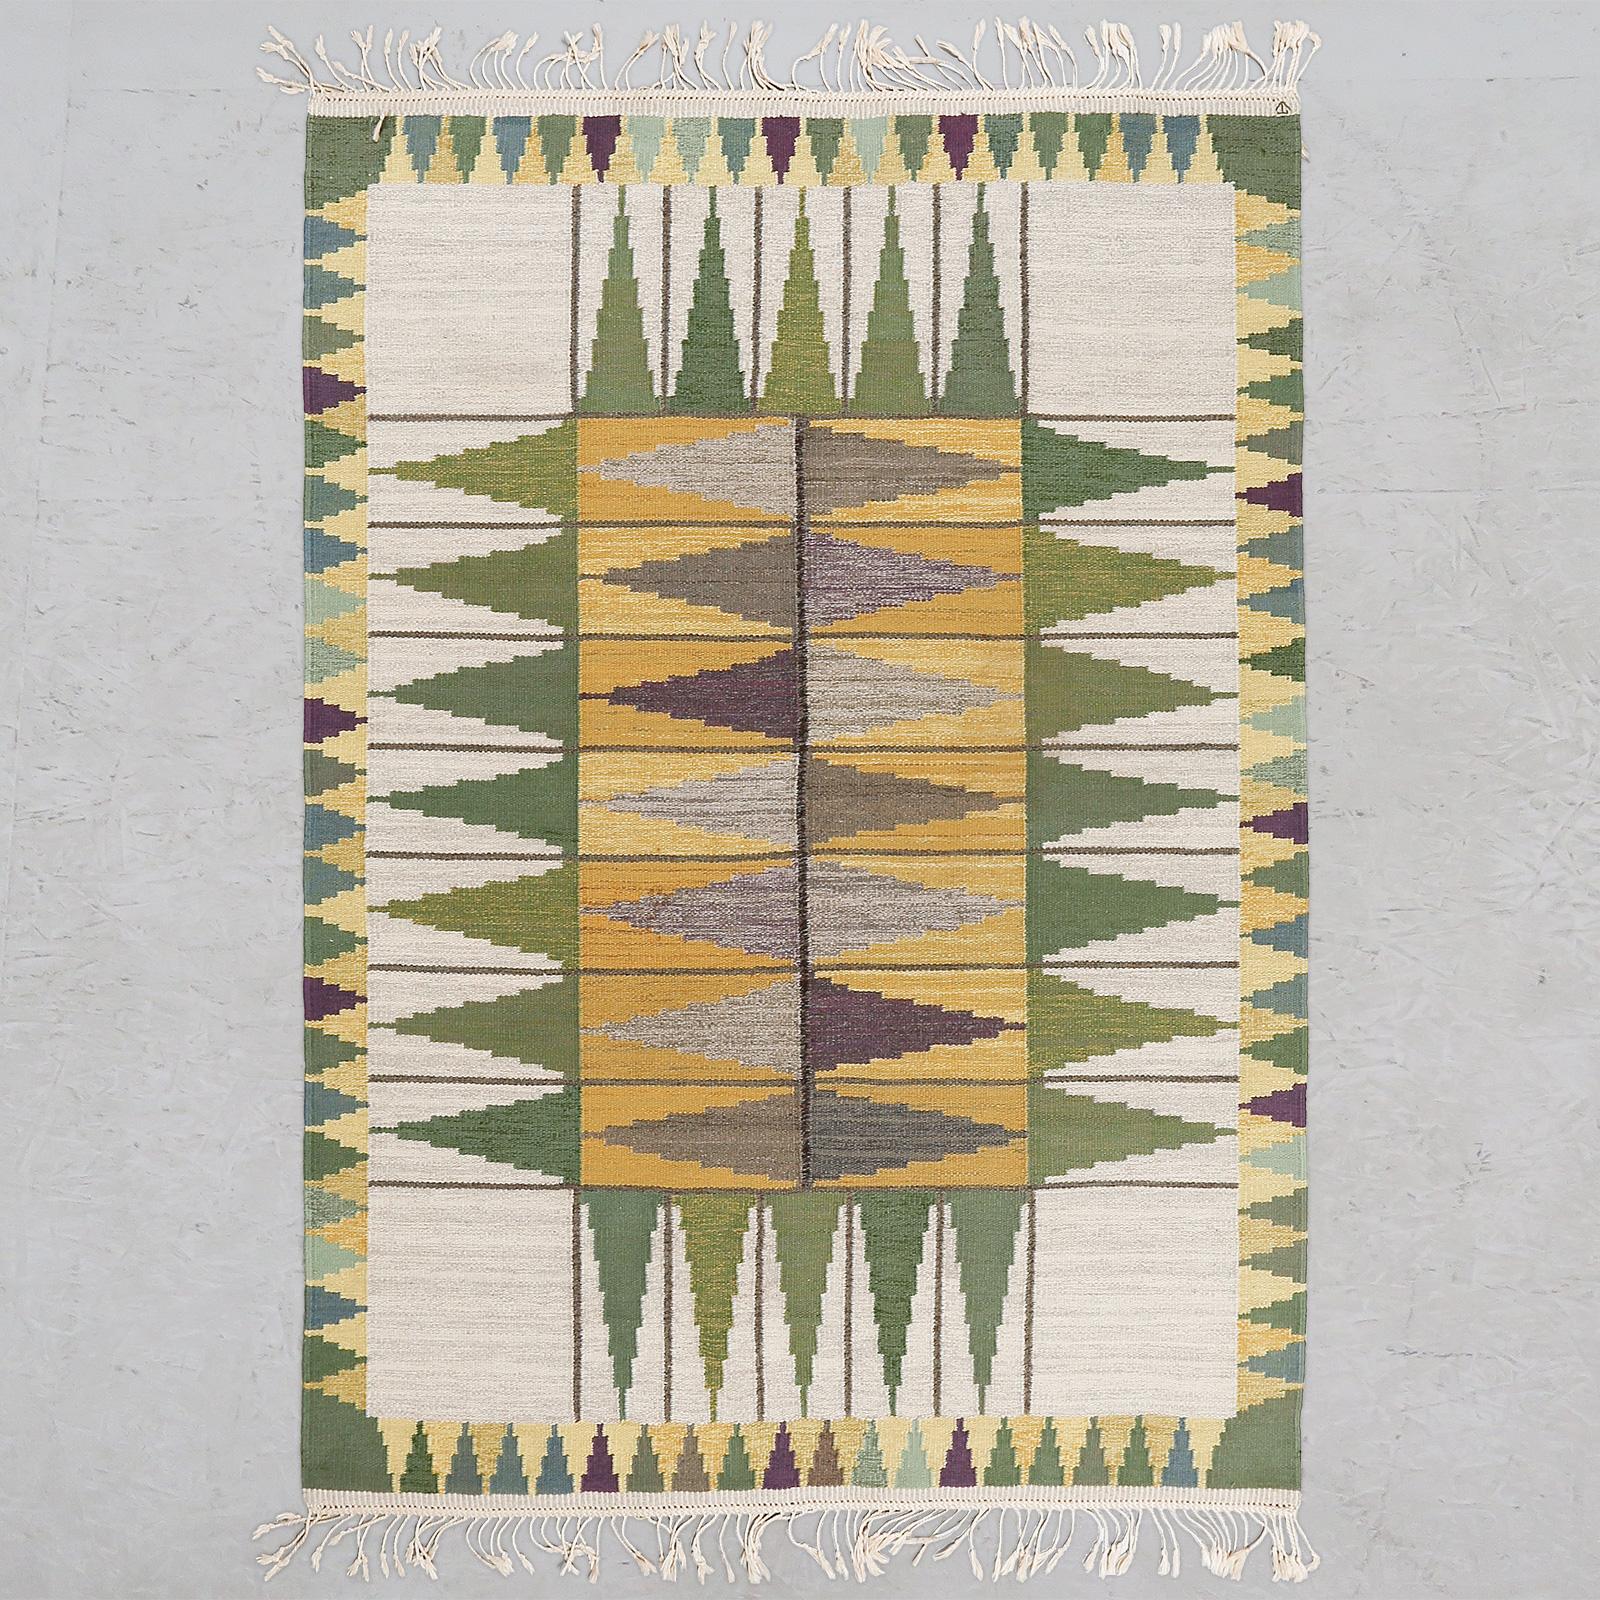 Wonderful, vintage Swedish flat-weave rug with geometric compositions in shades of green, beige and yellow. Signed TV.